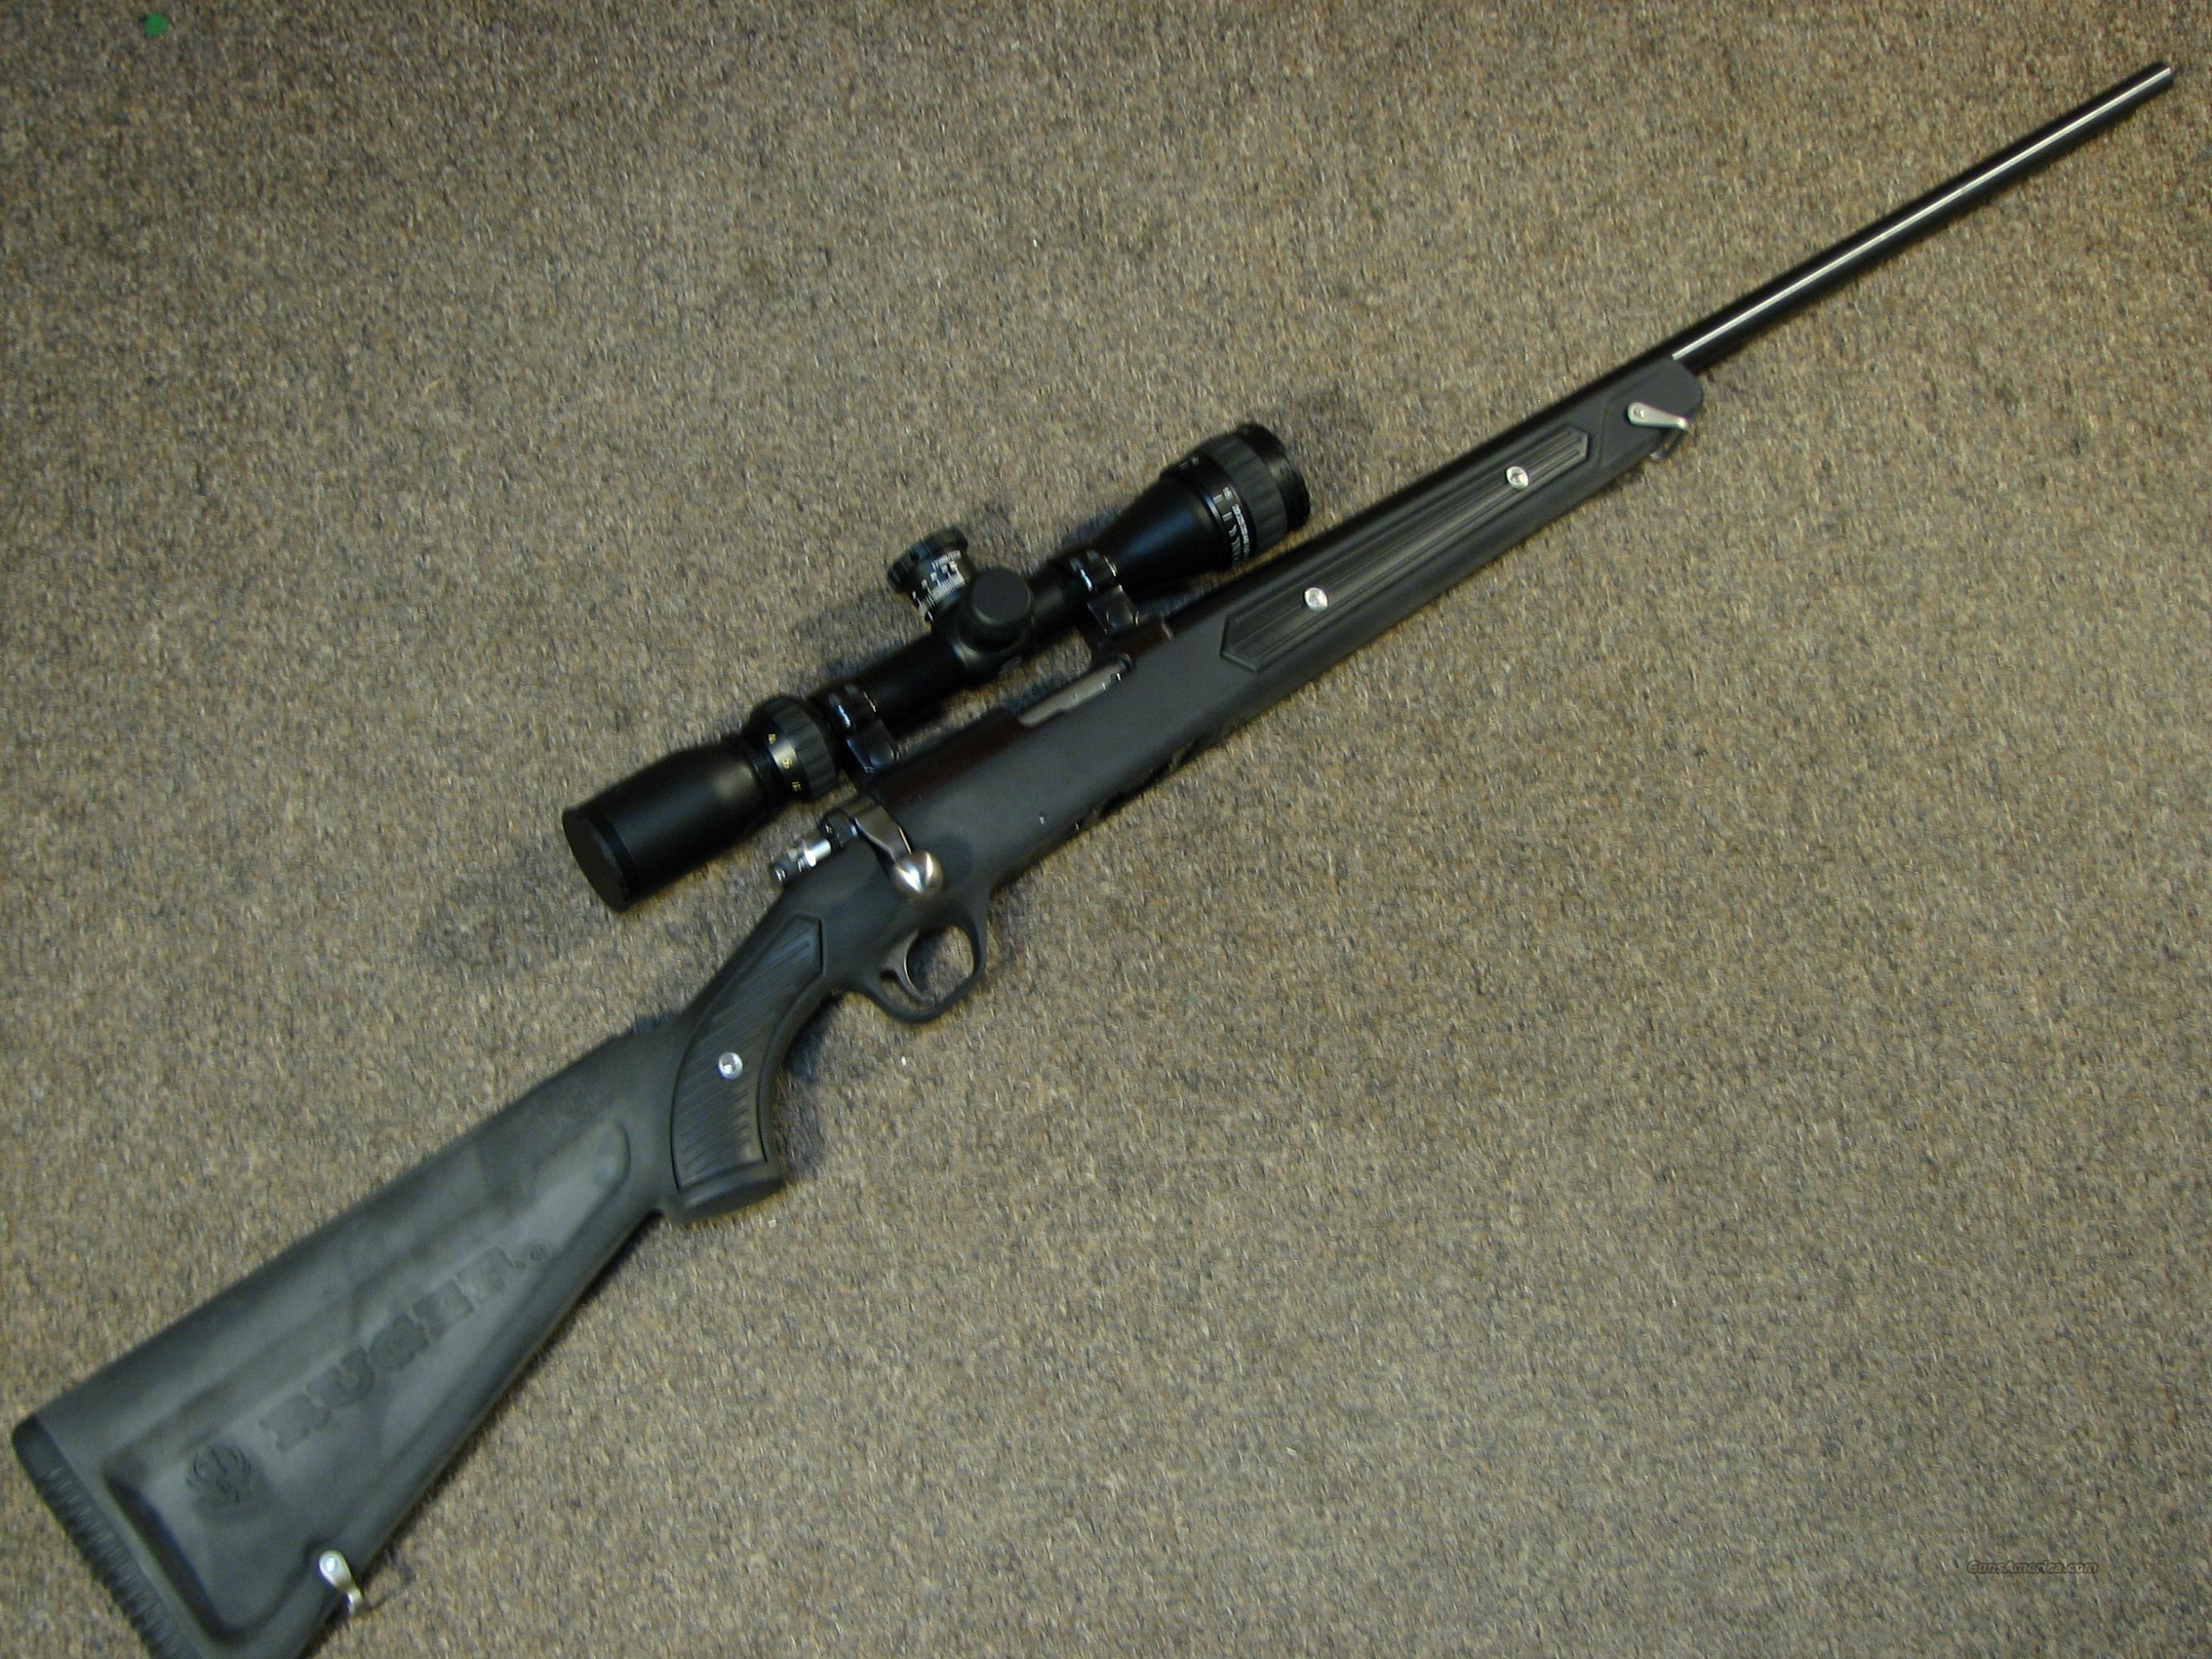 Weapons Ruger 77 17 Rifle HD Wallpapers. 